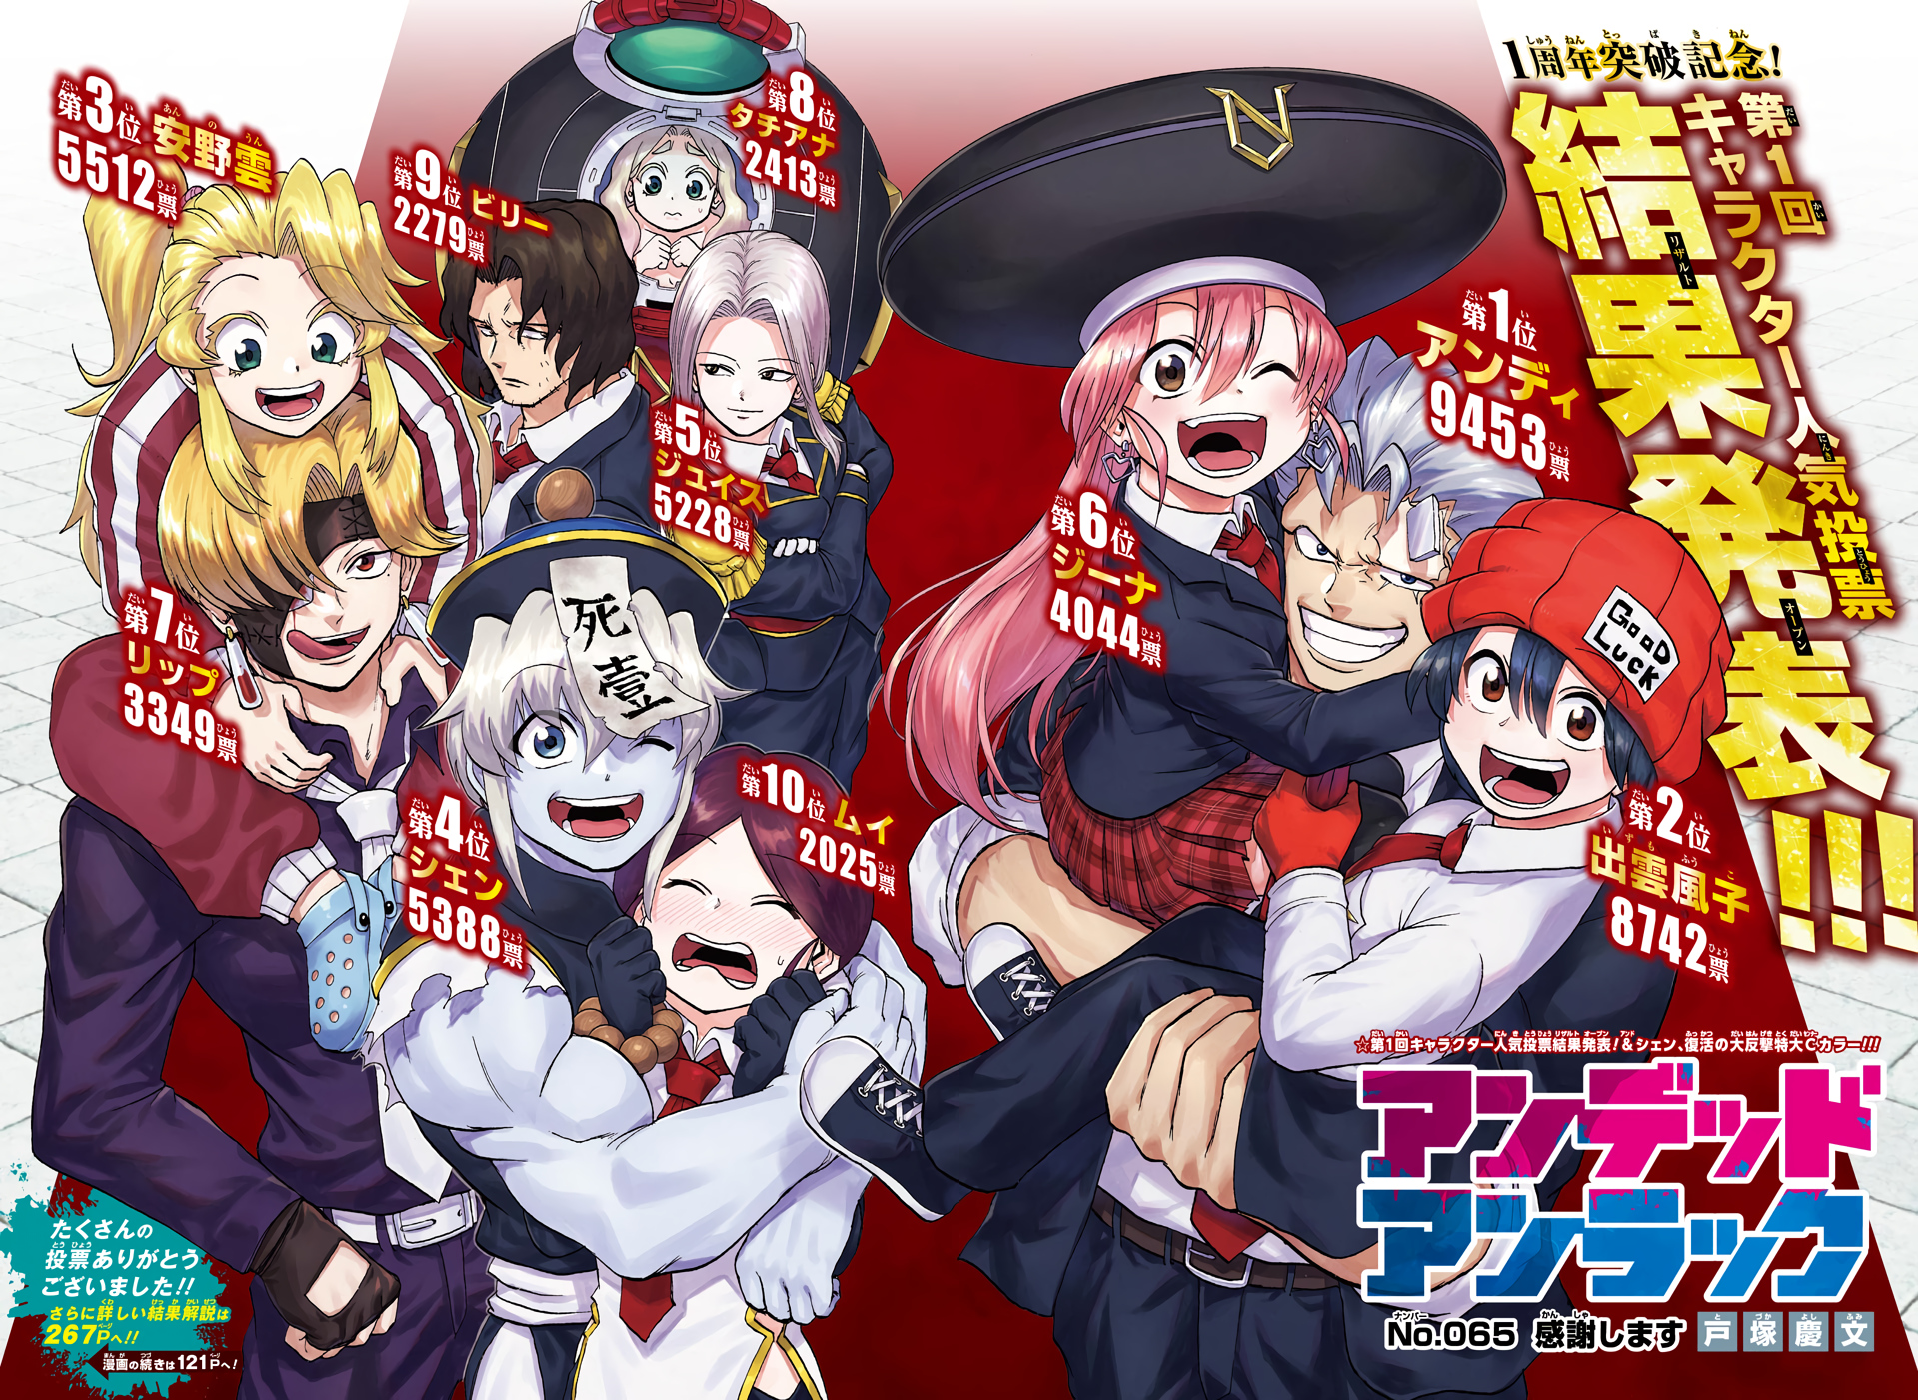 New Undead Unluck Anime Visual Rises from the Grave